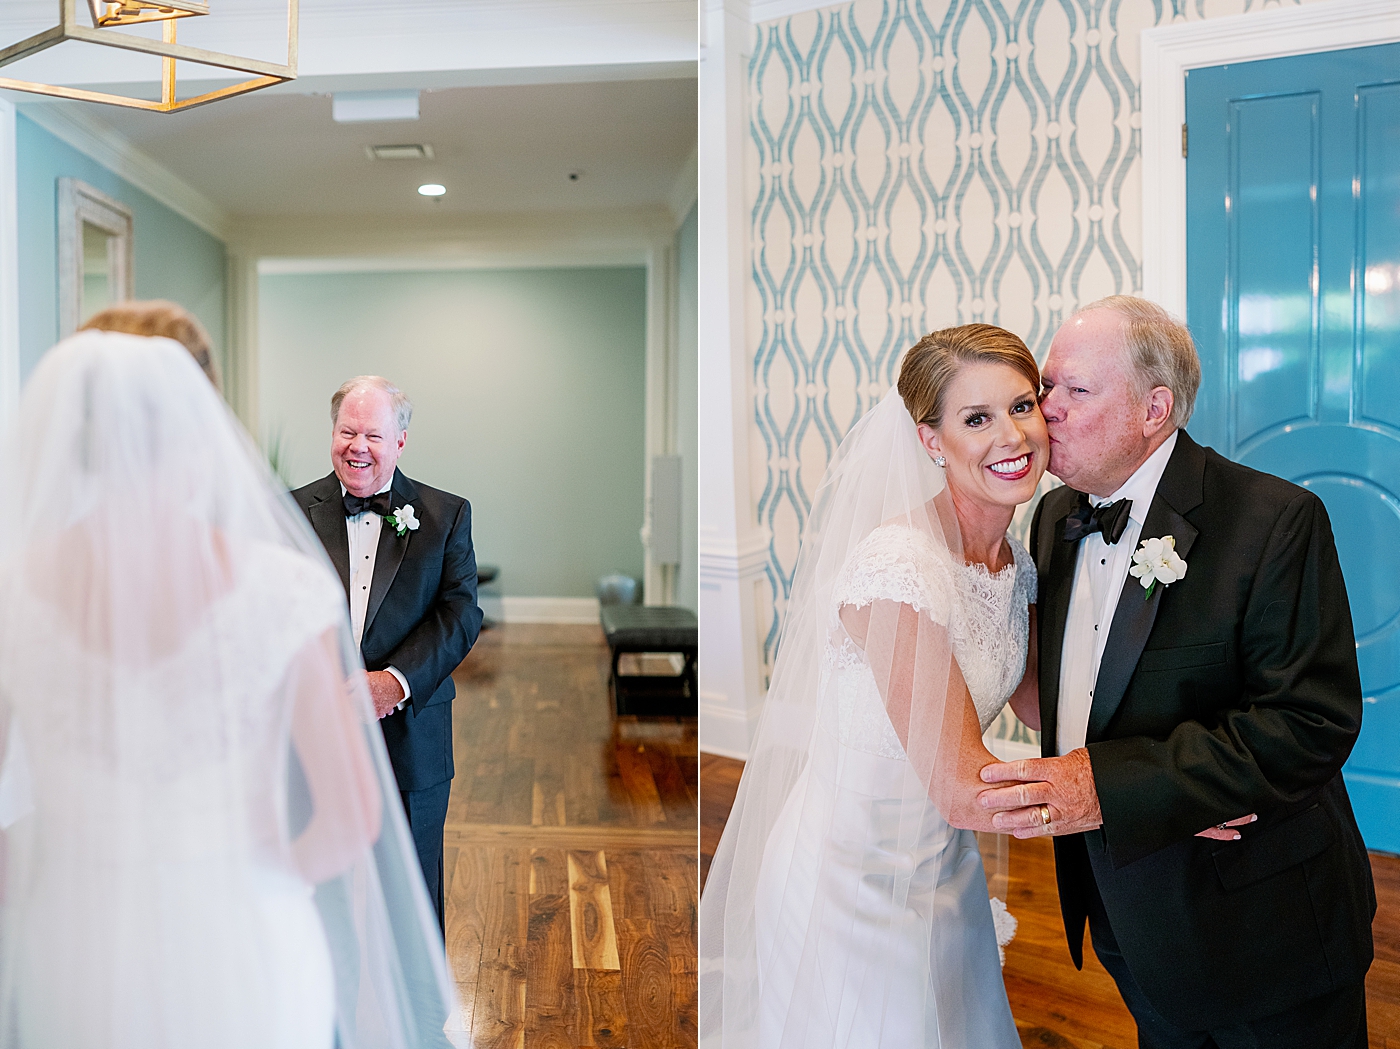 Bride and first look with her dad | Image by Annie Laura Photo